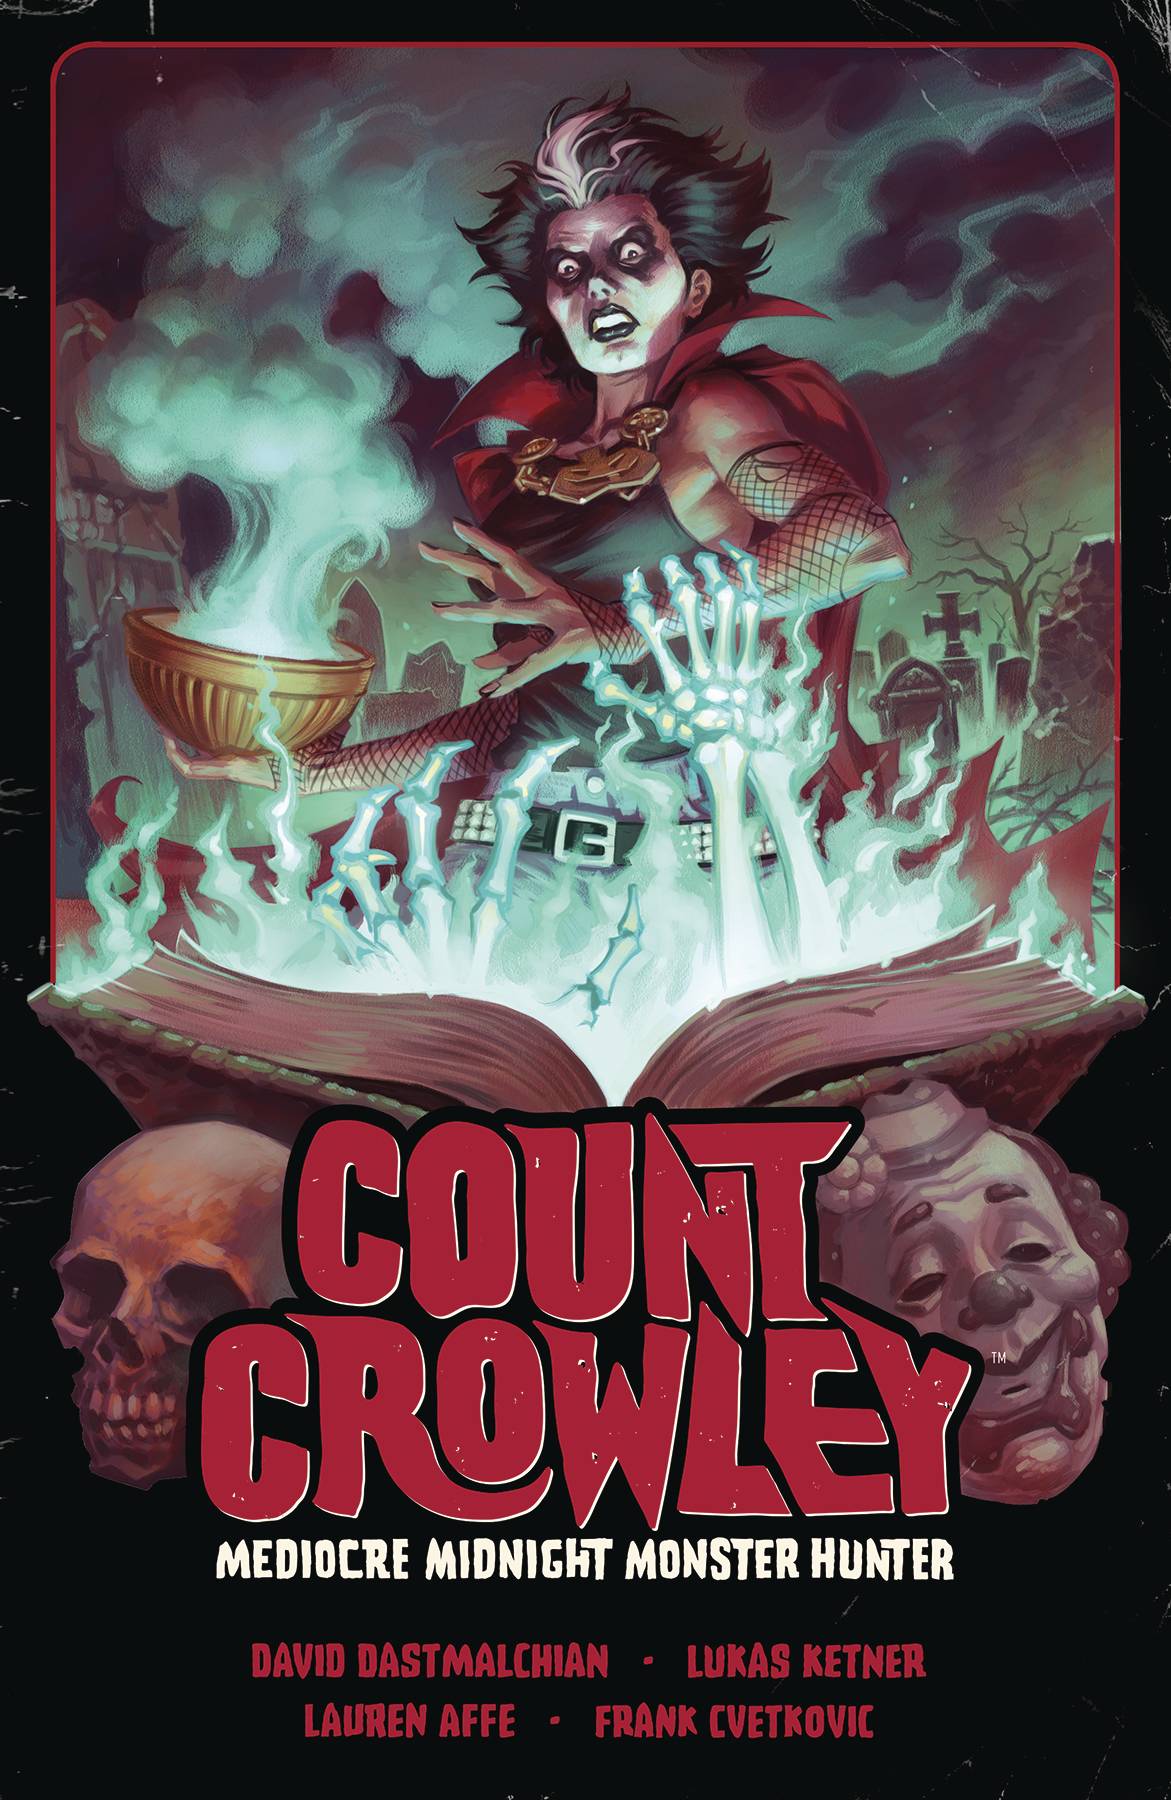 COUNT CROWLEY TP 03 MEDIOCRE MIDNIGHT MONSTER HUNTER